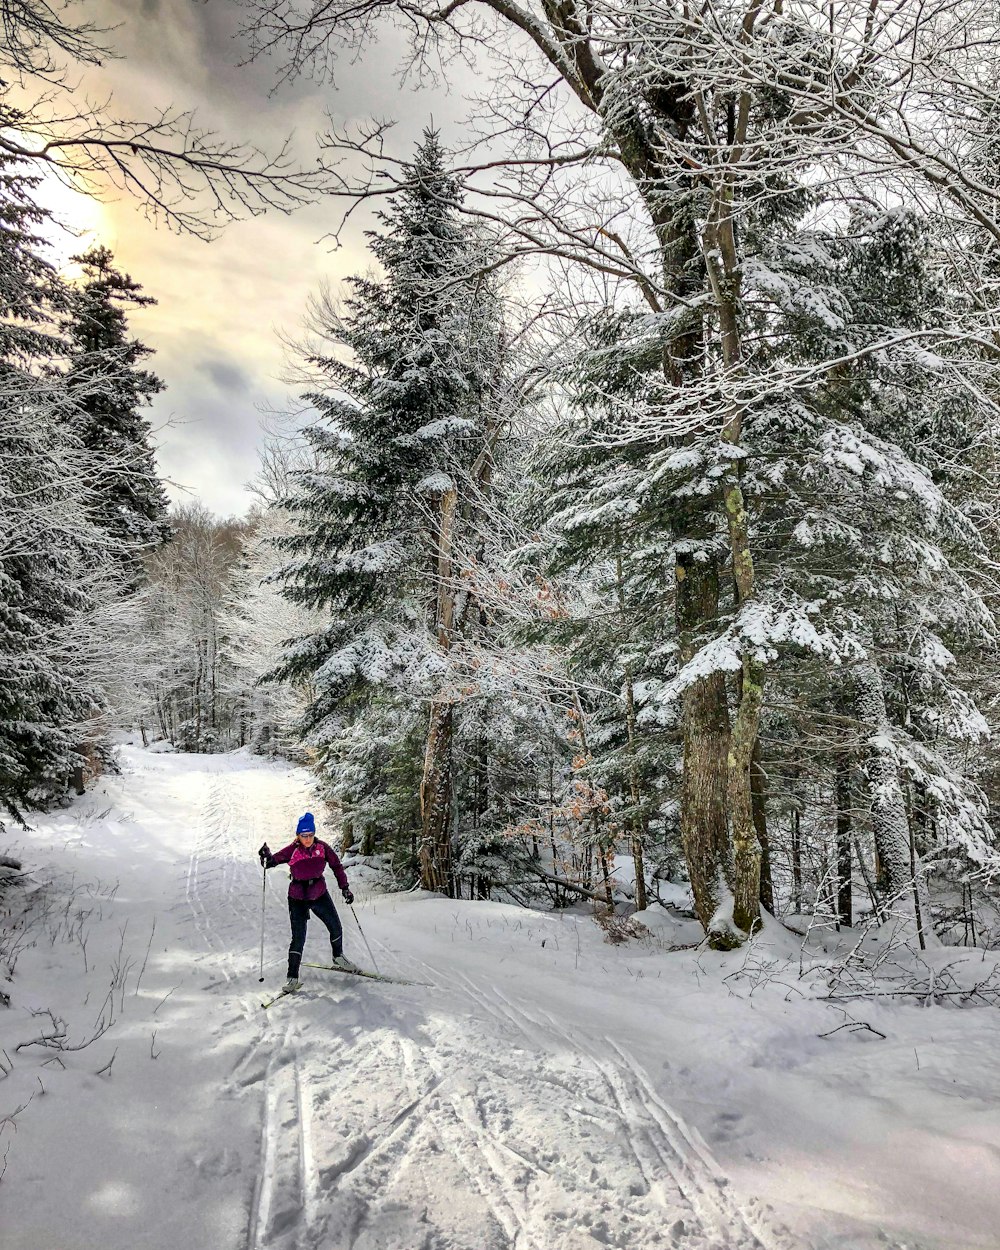 person skiing near trees under white clouds during daytime